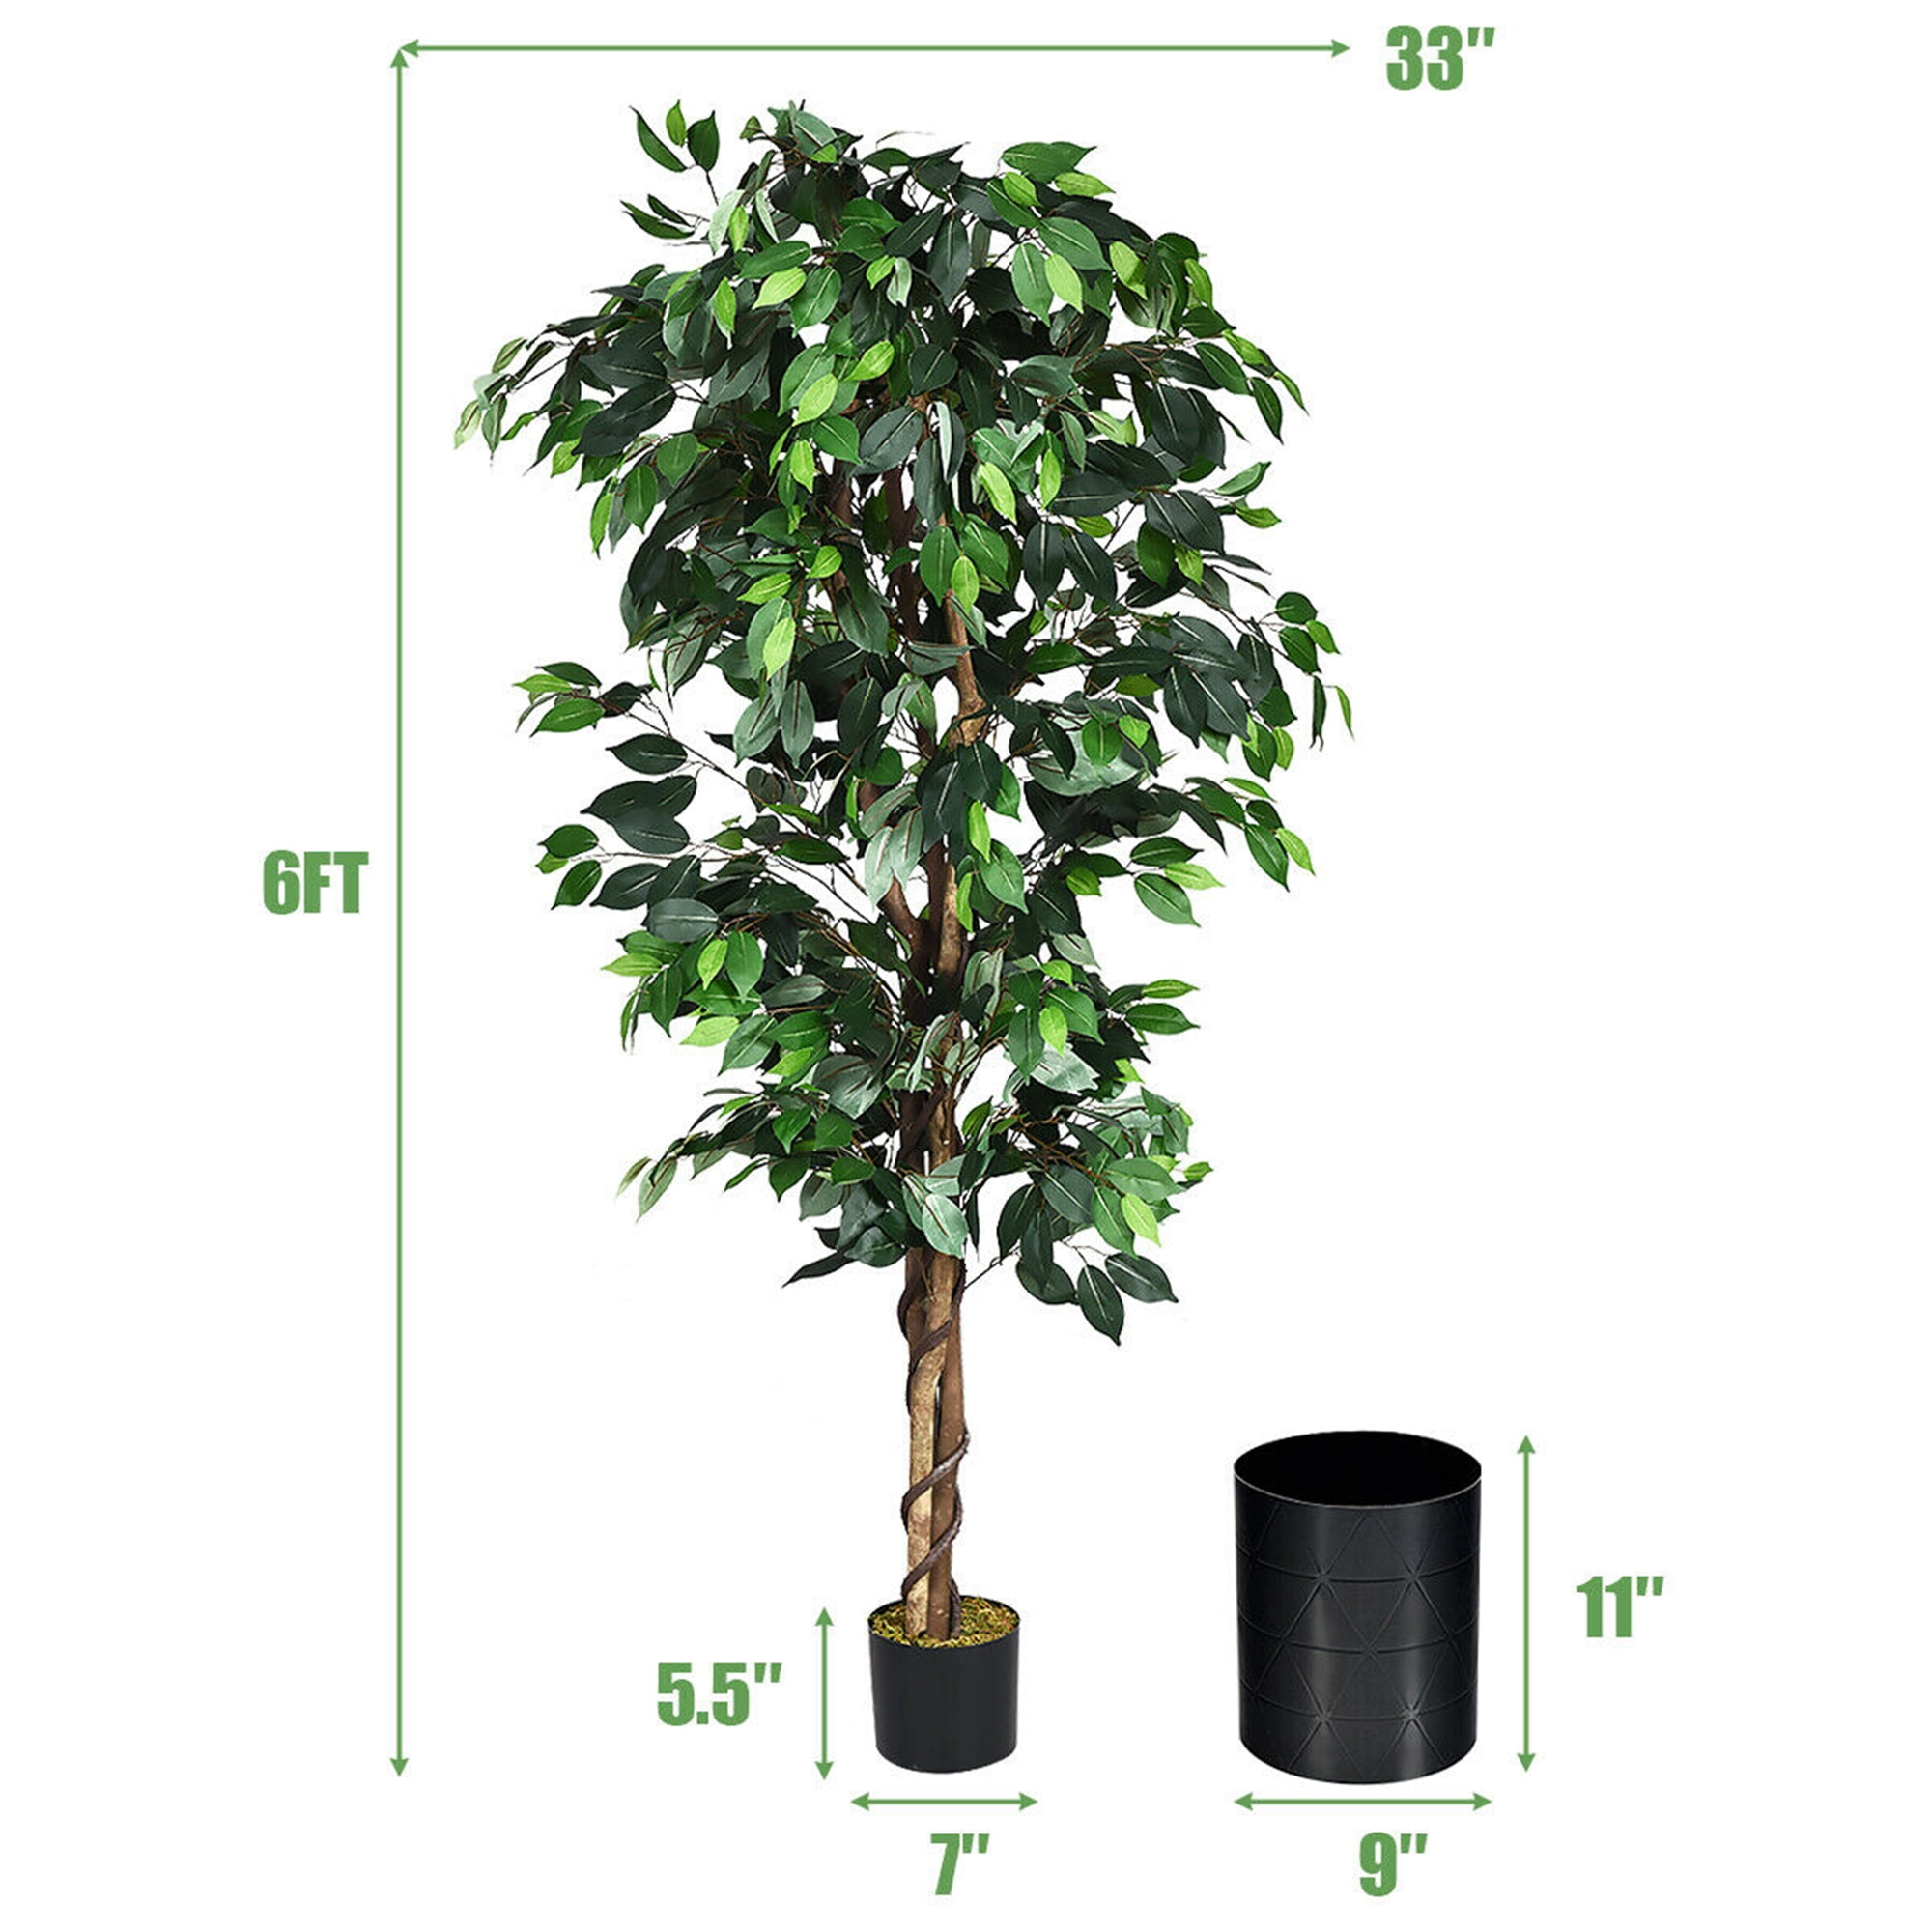 Best Deal for WMYDNX Greenery Tall Fake Plants Iron Tree with Plastic